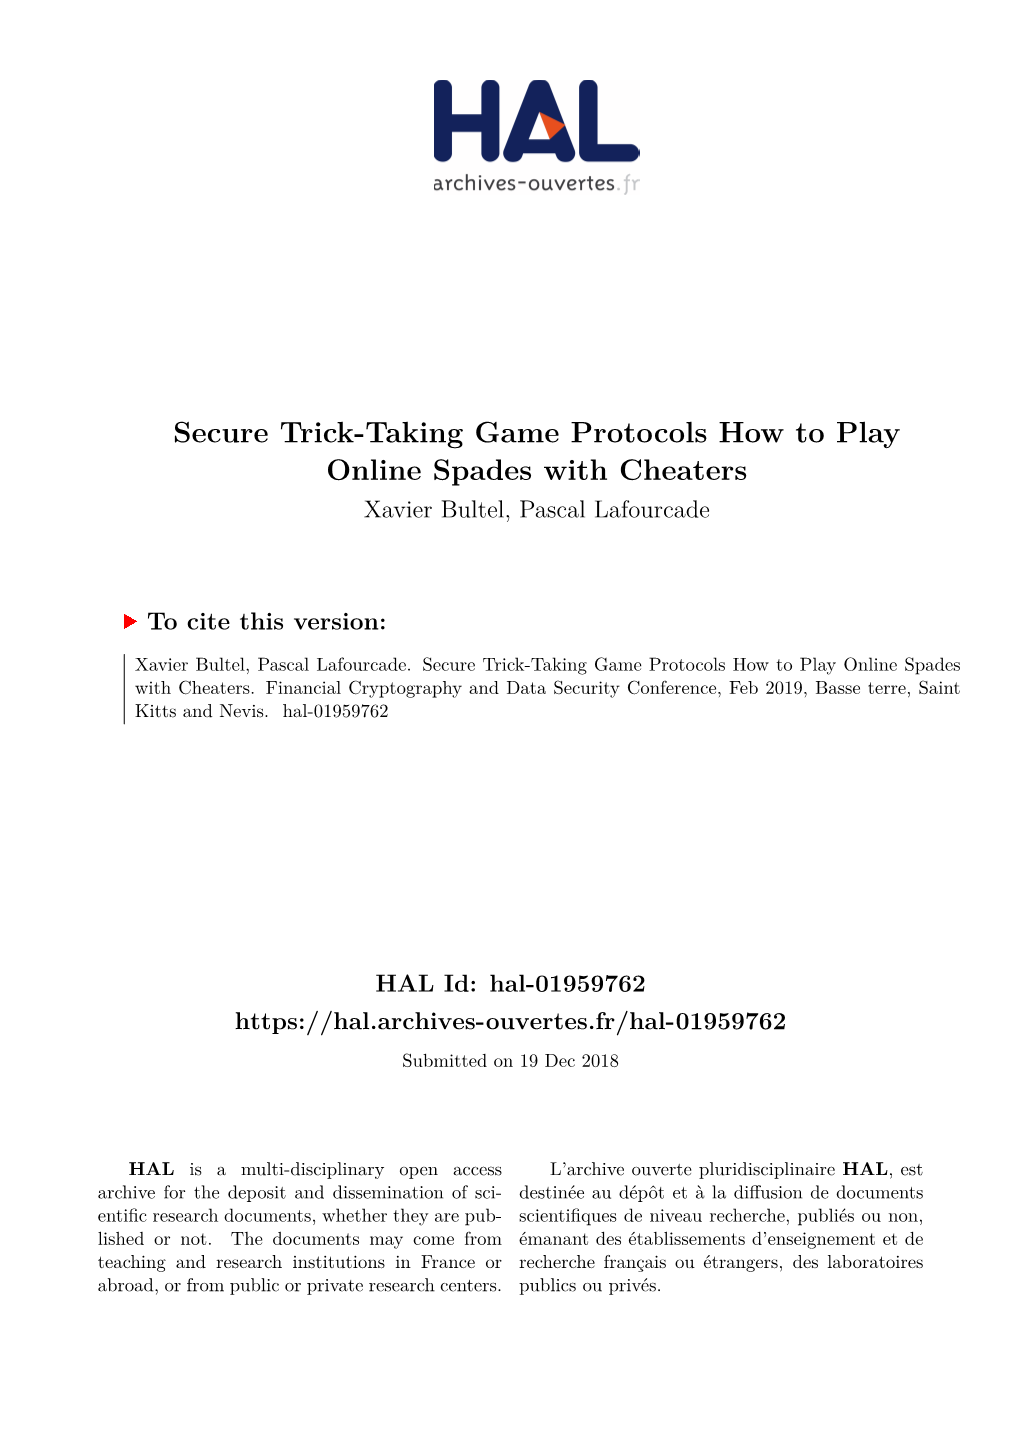 Secure Trick-Taking Game Protocols How to Play Online Spades with Cheaters Xavier Bultel, Pascal Lafourcade